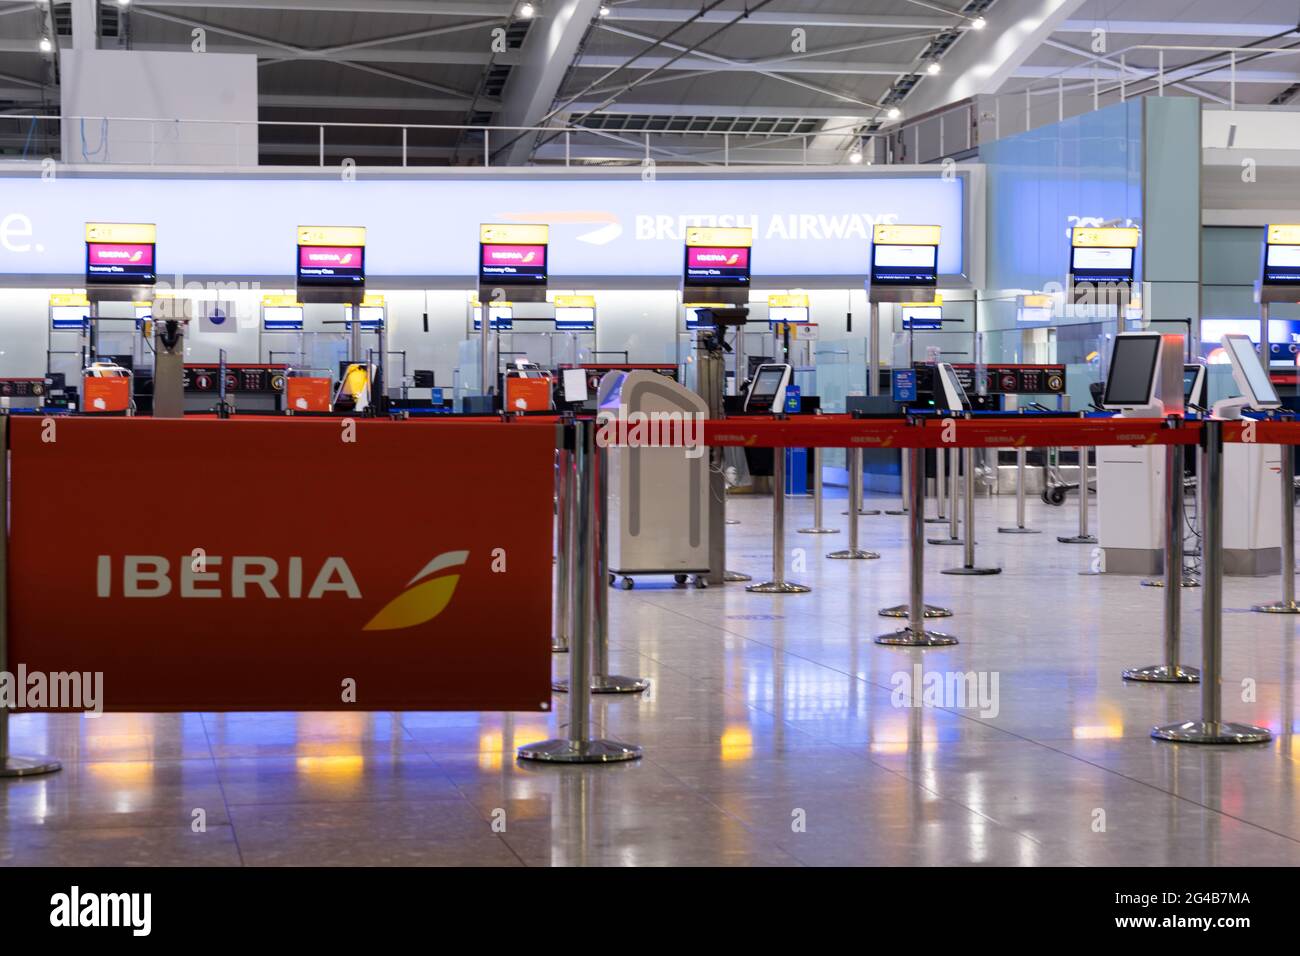 Check-in desk for IBERIA, IAG group, British airways at London Heahrow airport terminal, ENgland, UK Stock Photo